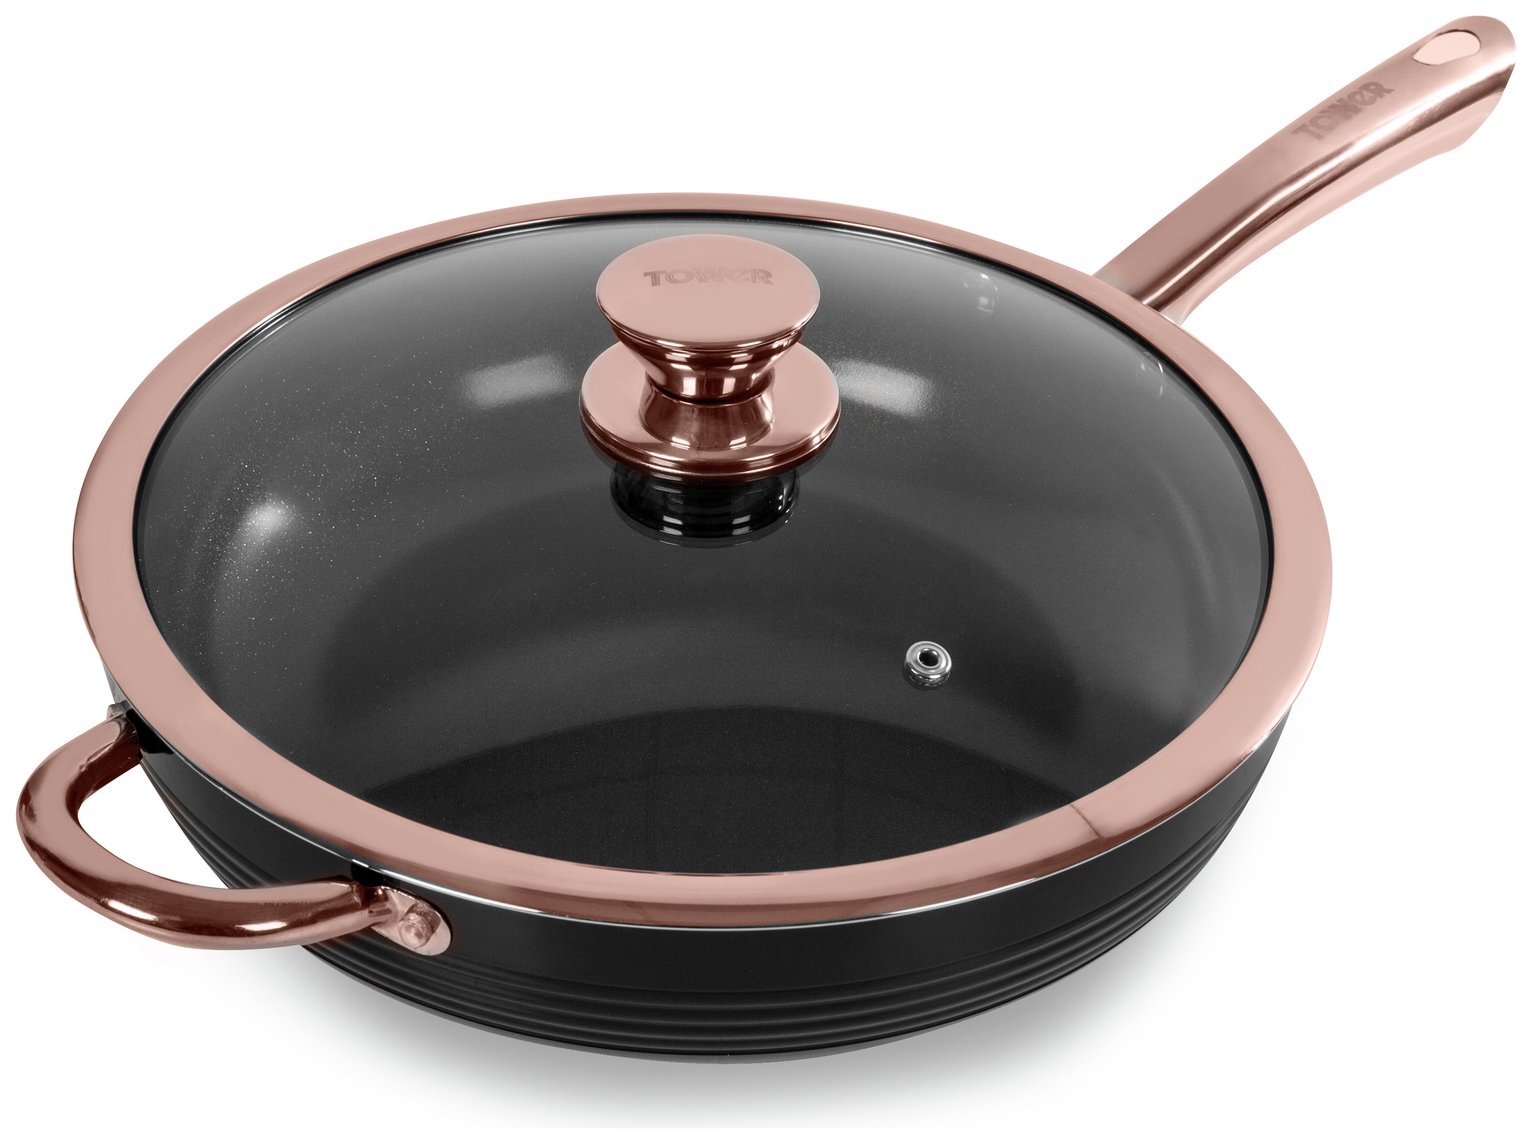 Tower Linear 28cm Multi-Pan - Black and Rose Gold